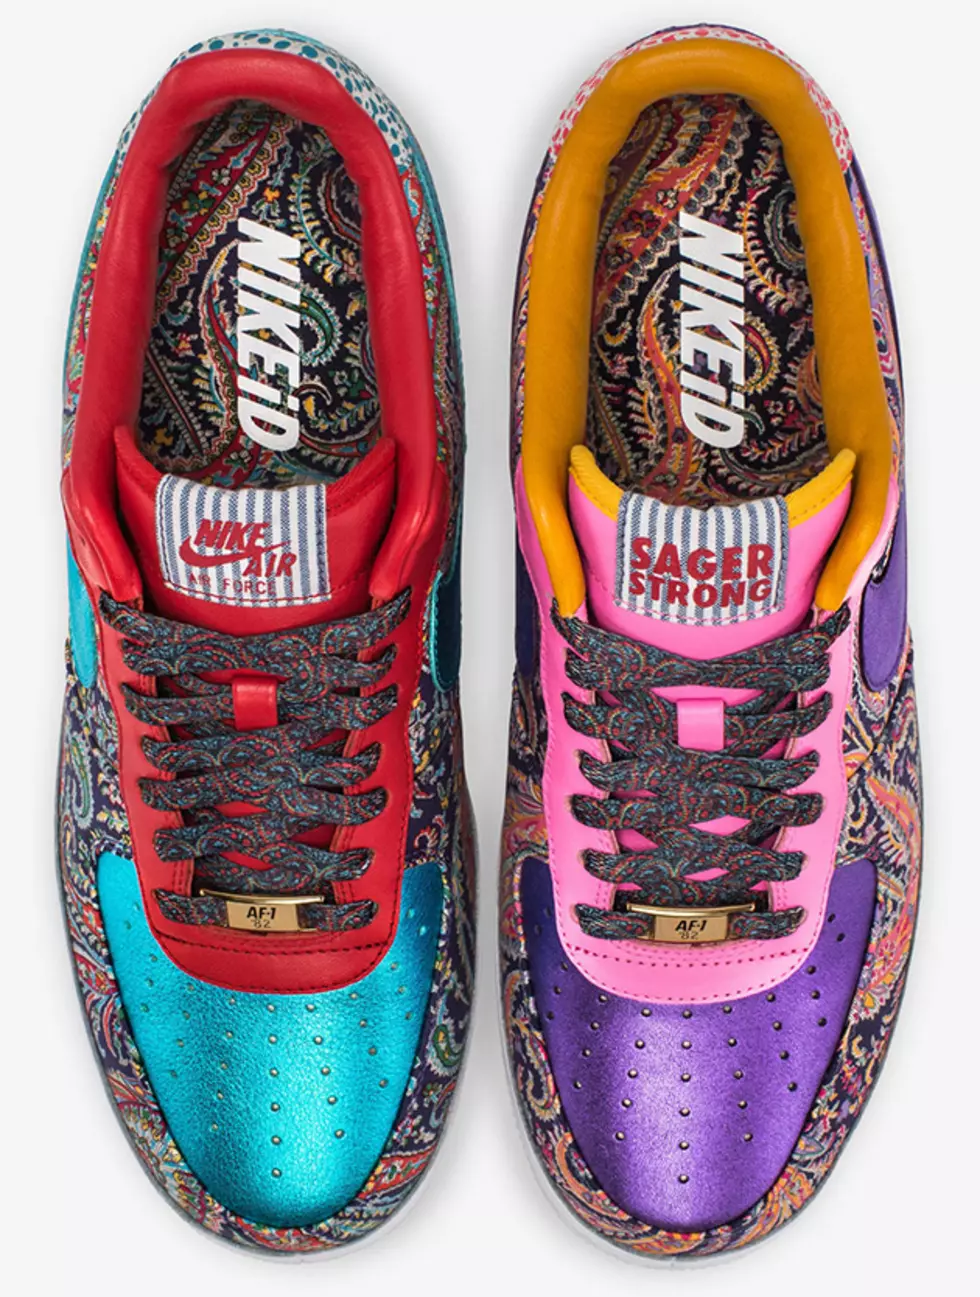 Sneakerhead: Craig Sager x Nike AIr Force 1 For Charity